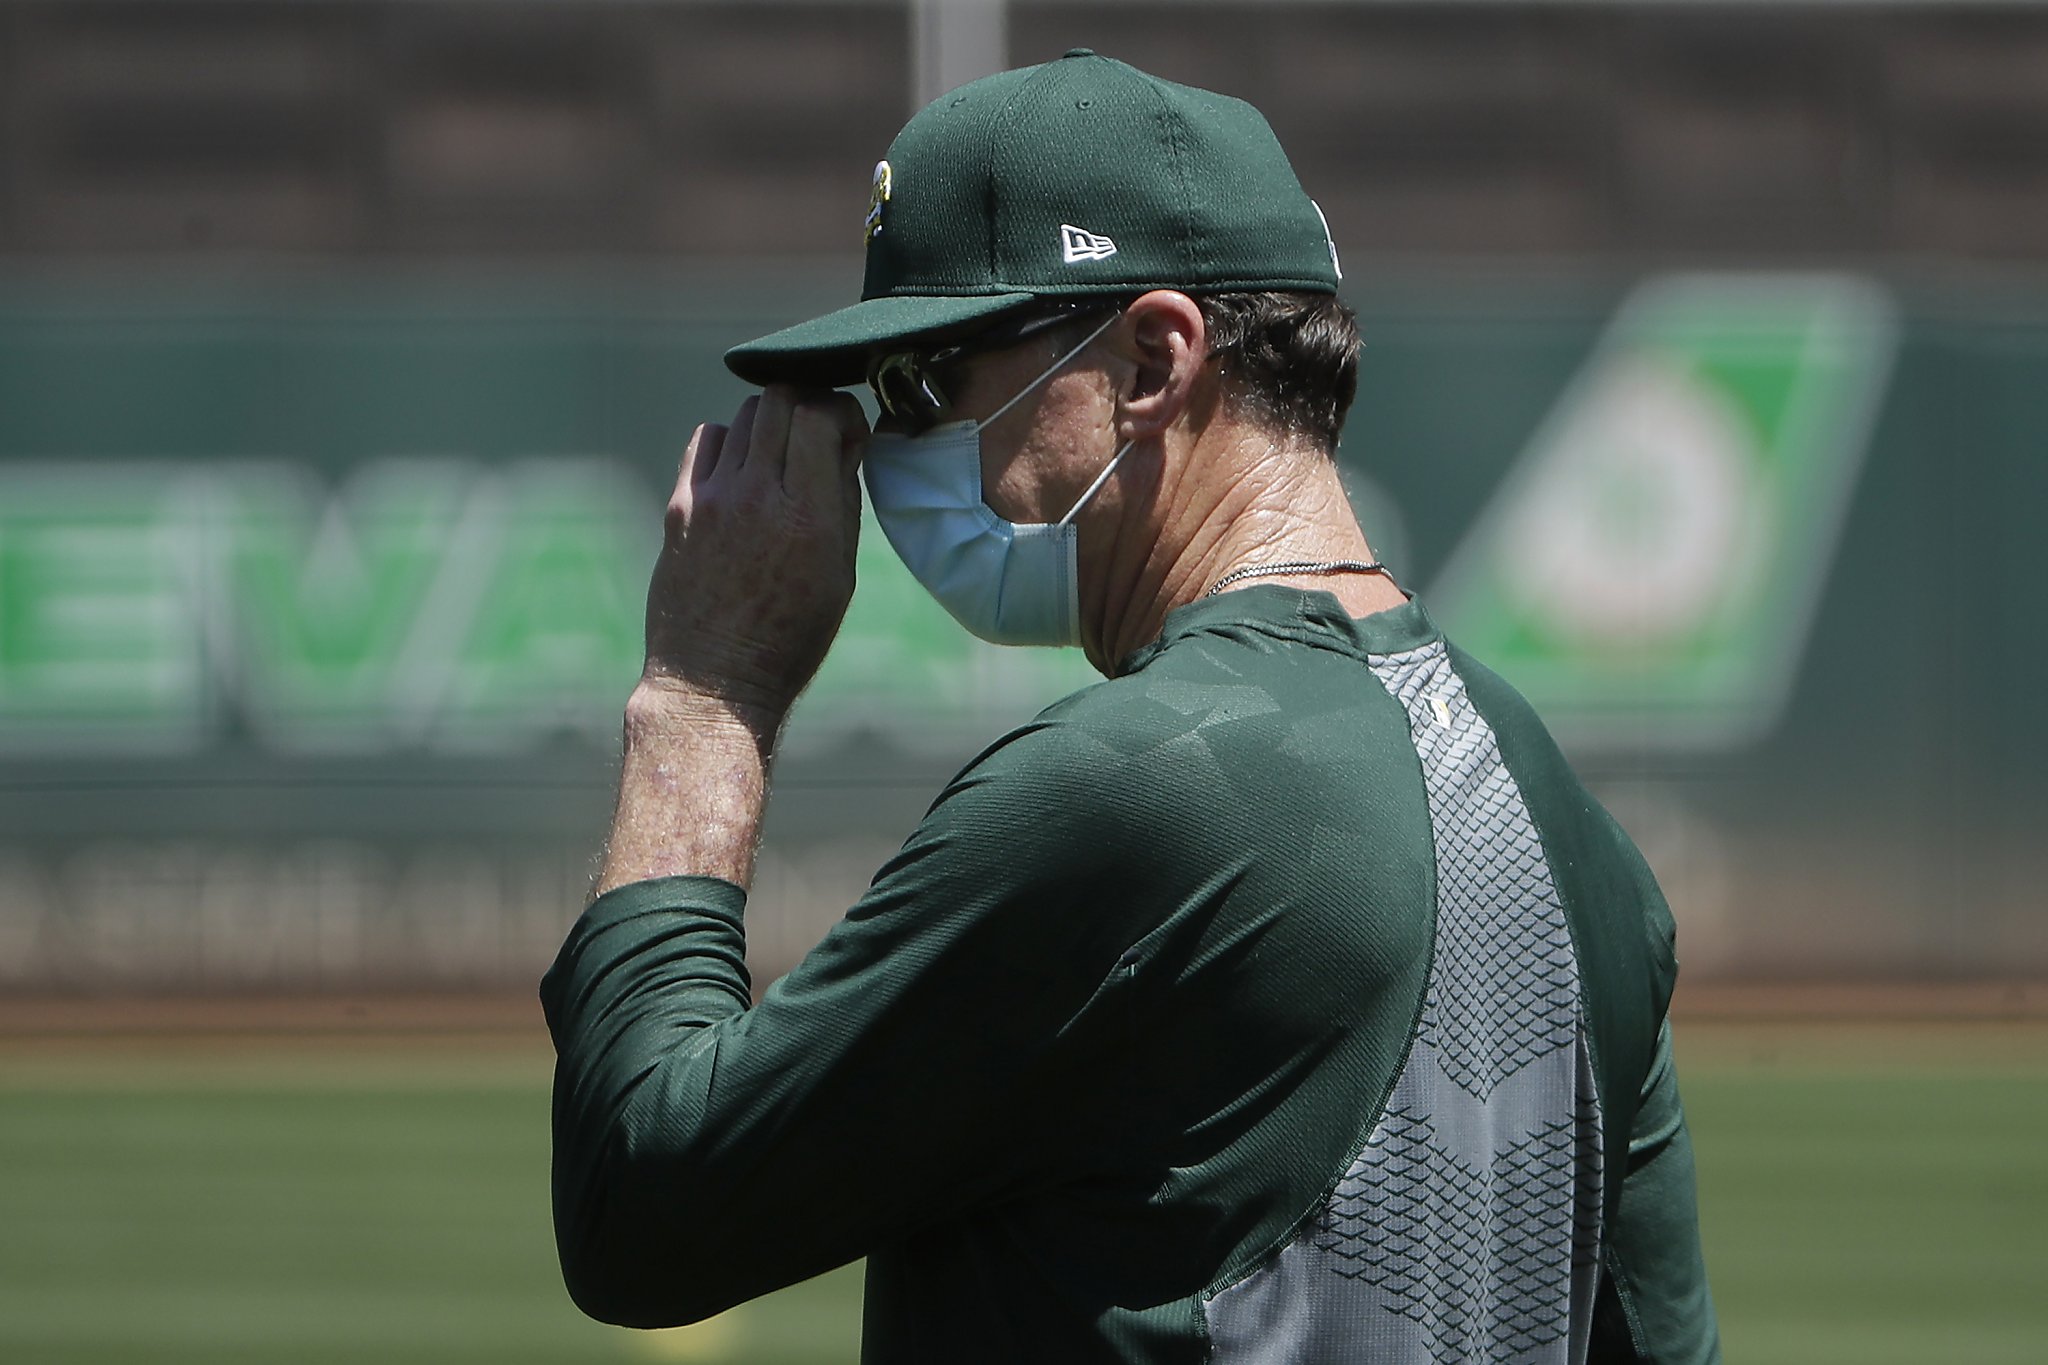 Why Are Baseball Players Wearing Green Hats Today?